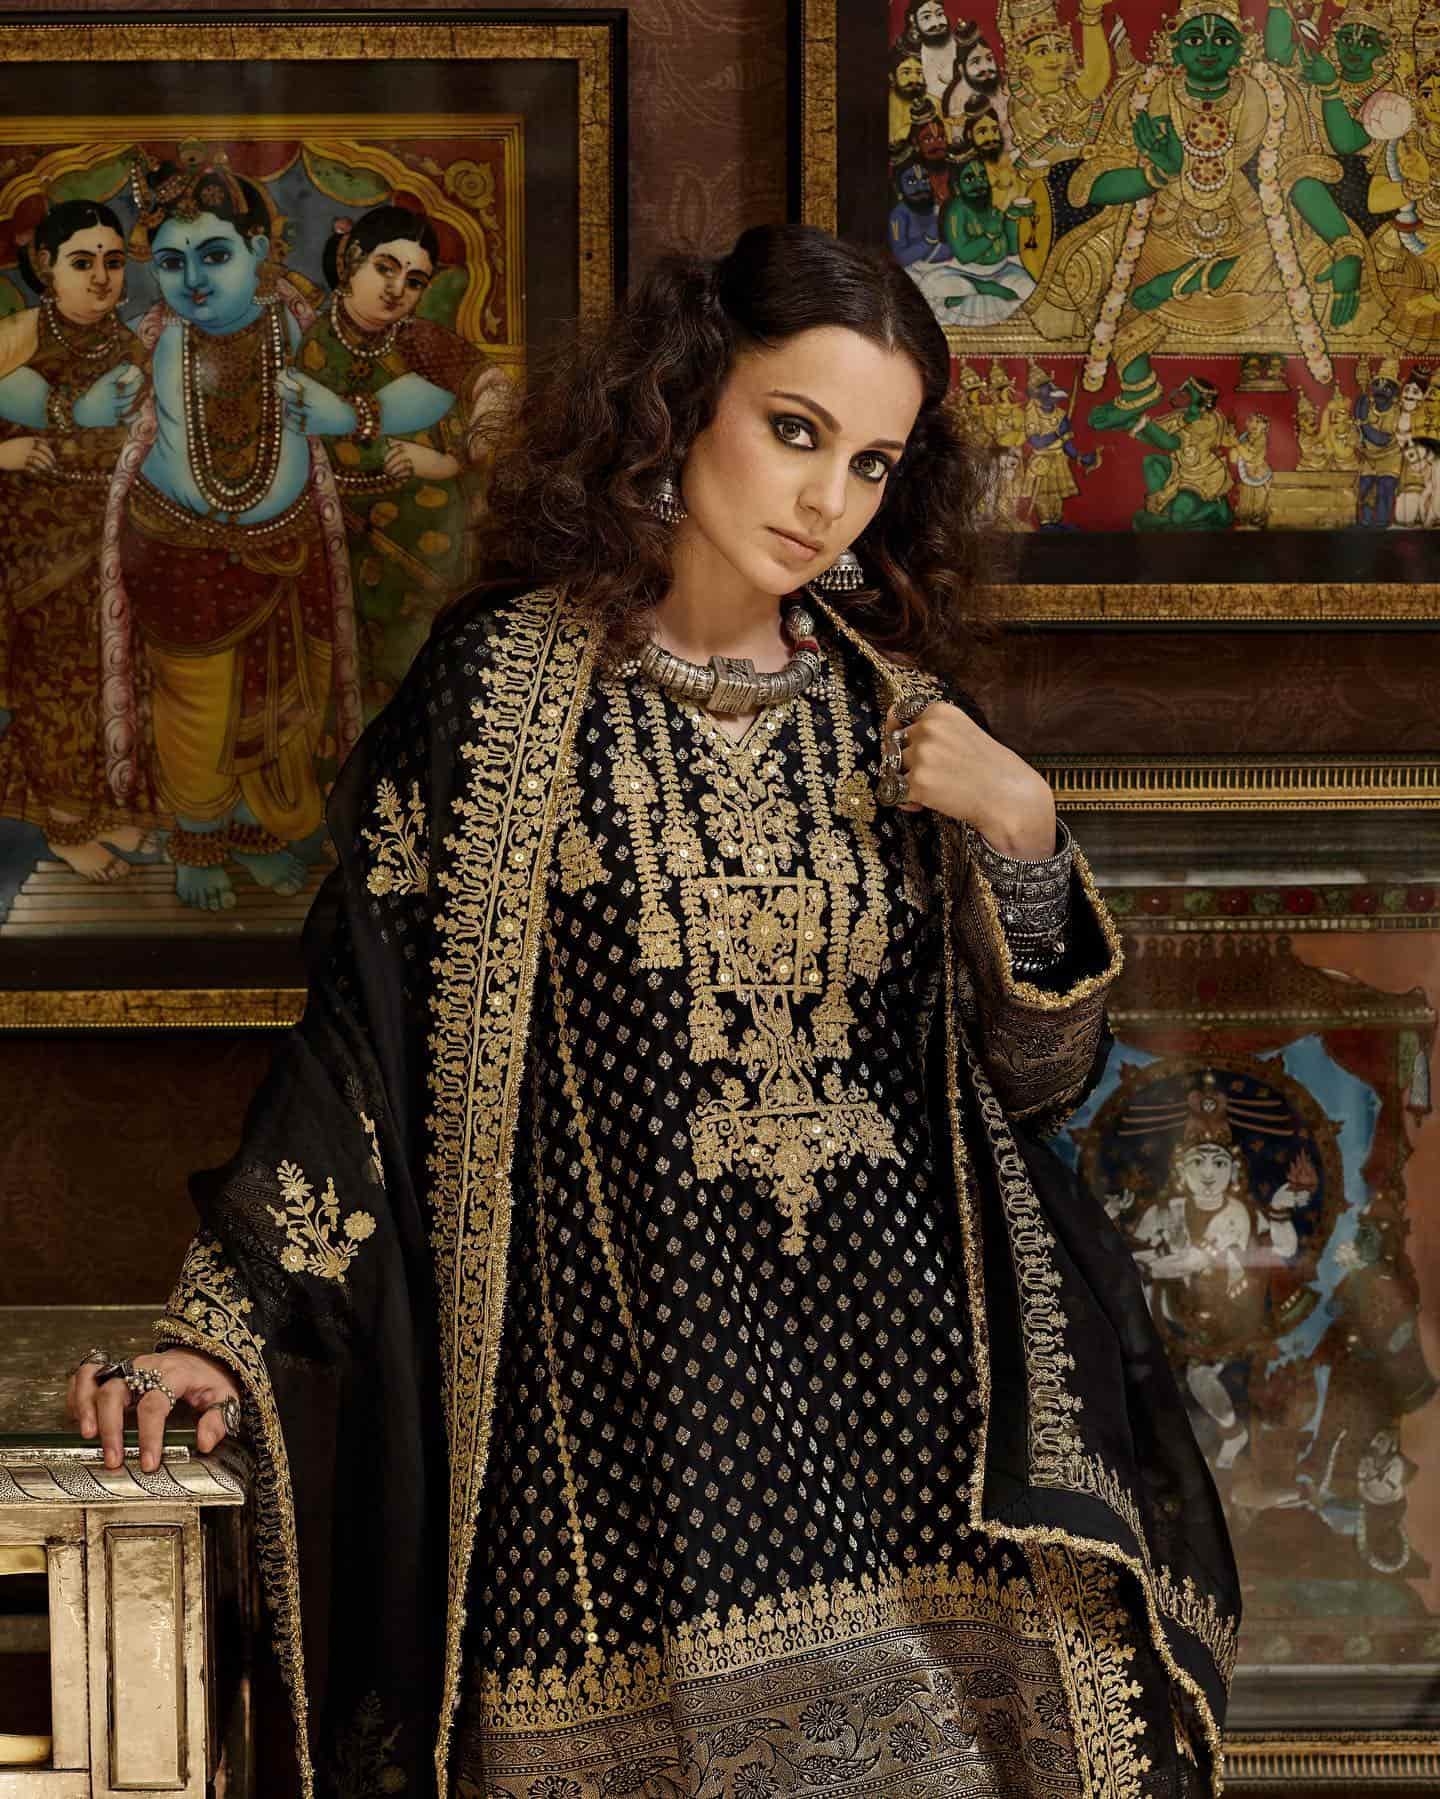 Kangana Ranaut Enthrals In Black And Gold Taluni Traditional Outfit, See Pics 848634